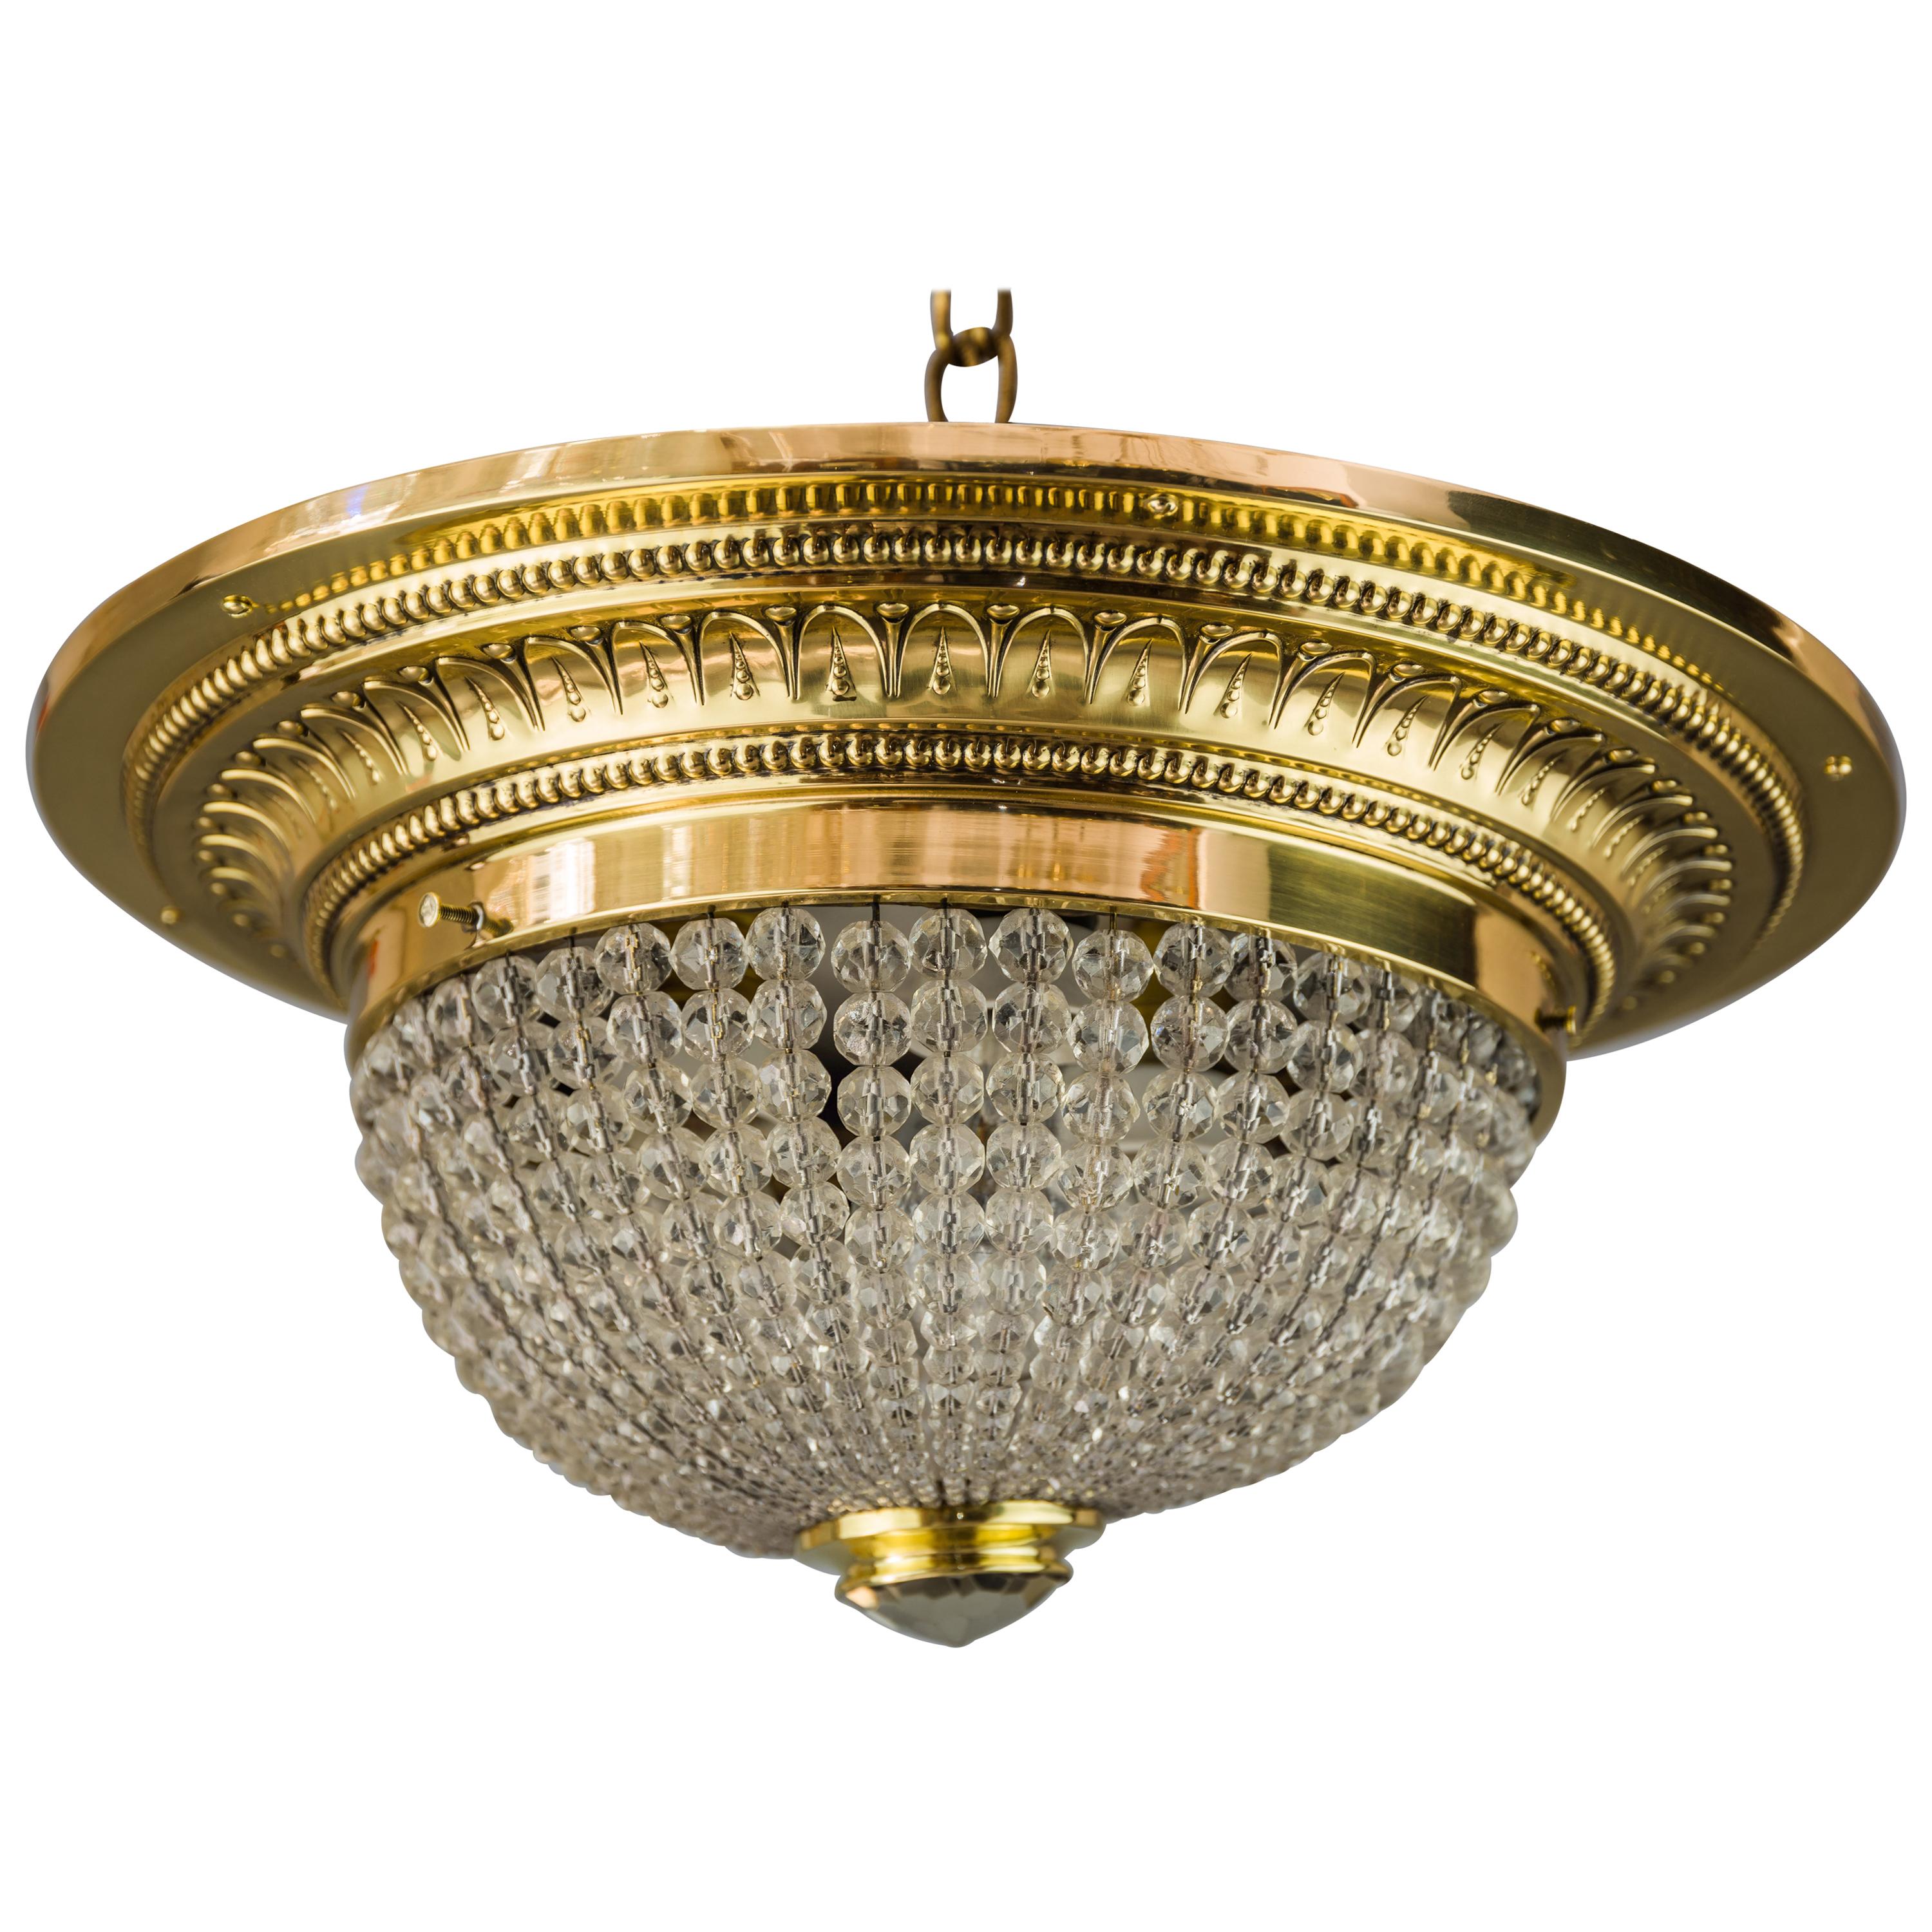 Art Deco Ceiling Lamp with Small Cut Glass Balls, circa 1920s